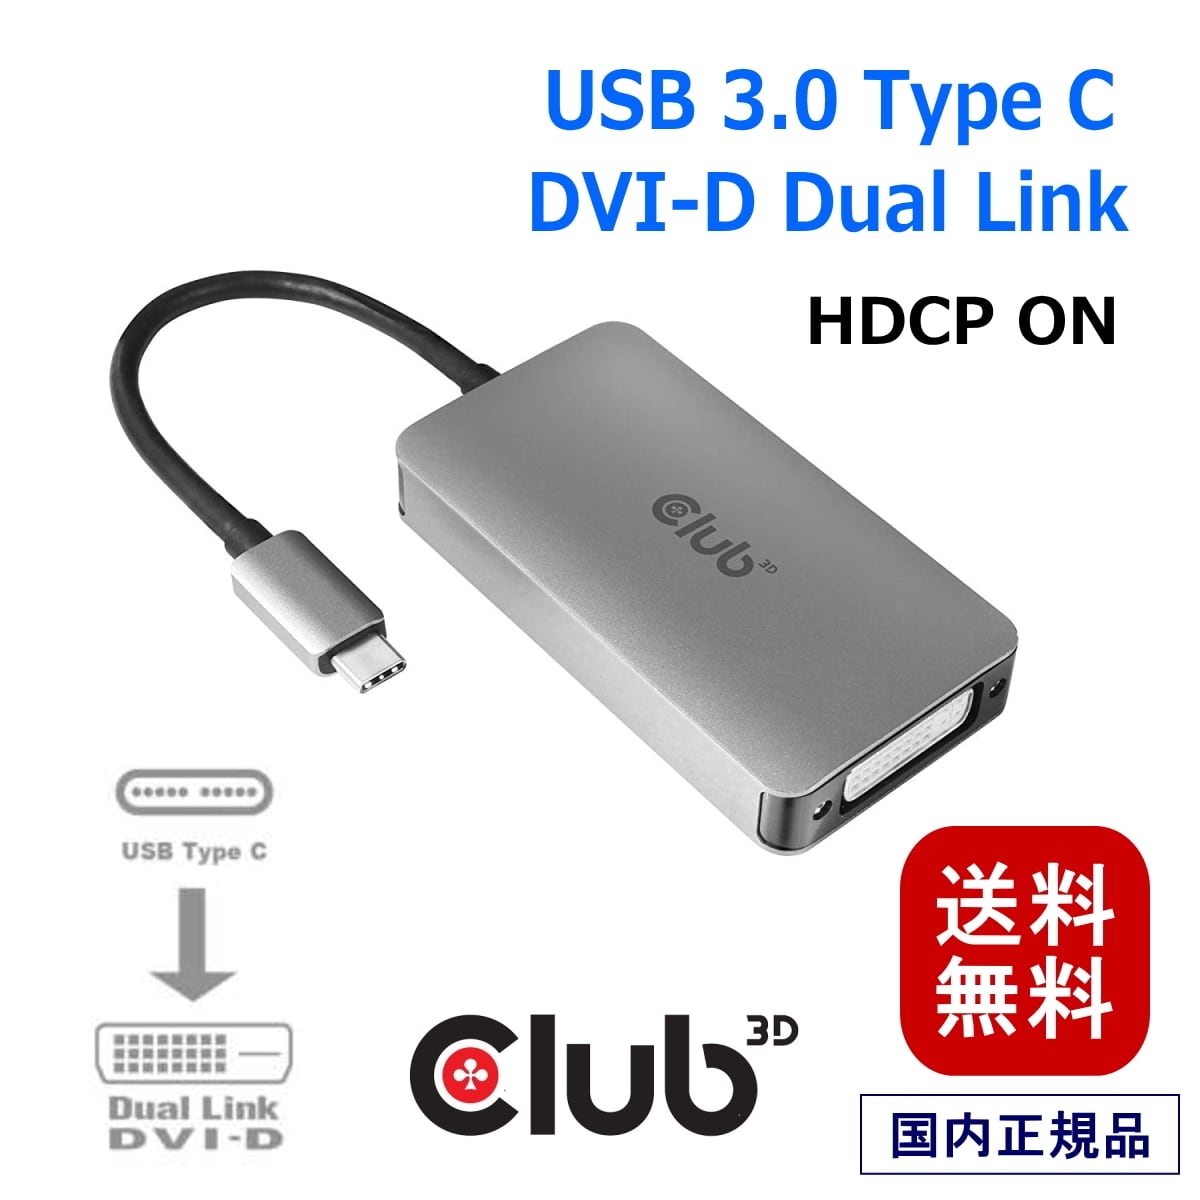 CAC-1510】Club3D USB Type C to DVI-D DUAL LINK Active Adapter アクティブアダプタ  [HDCP ON バージョン] | BearHouse